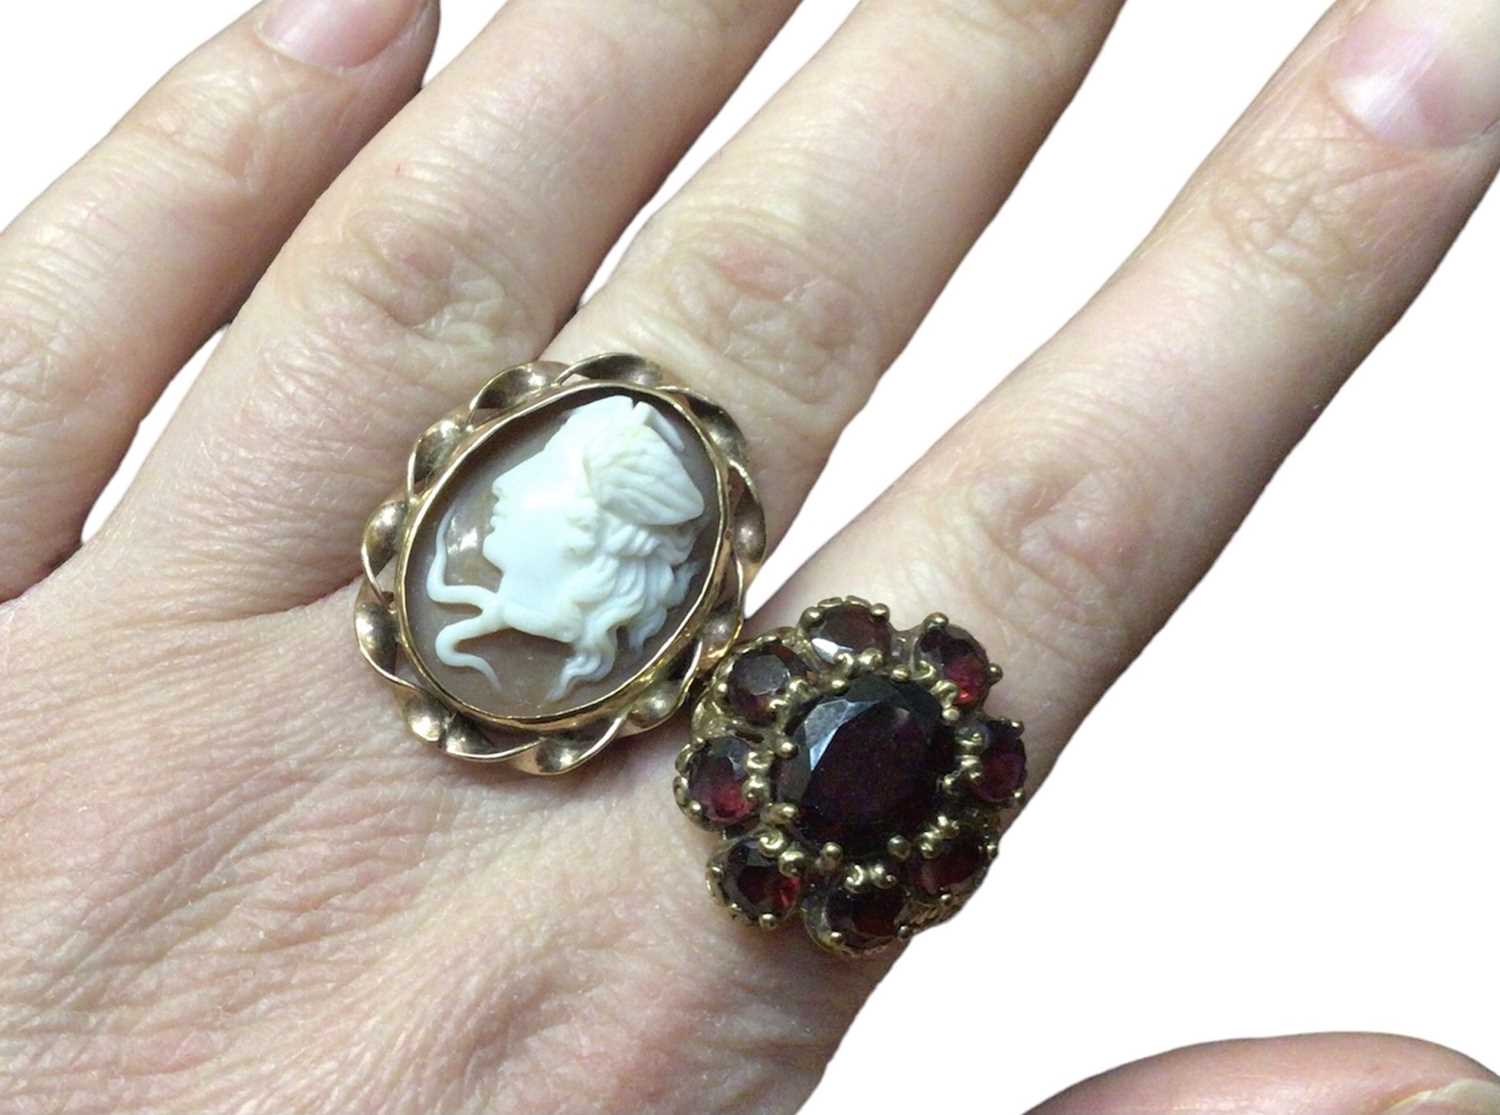 9ct gold mounted carved shell cameo ring and 9ct gold garnet cluster ring (2) - Image 3 of 3